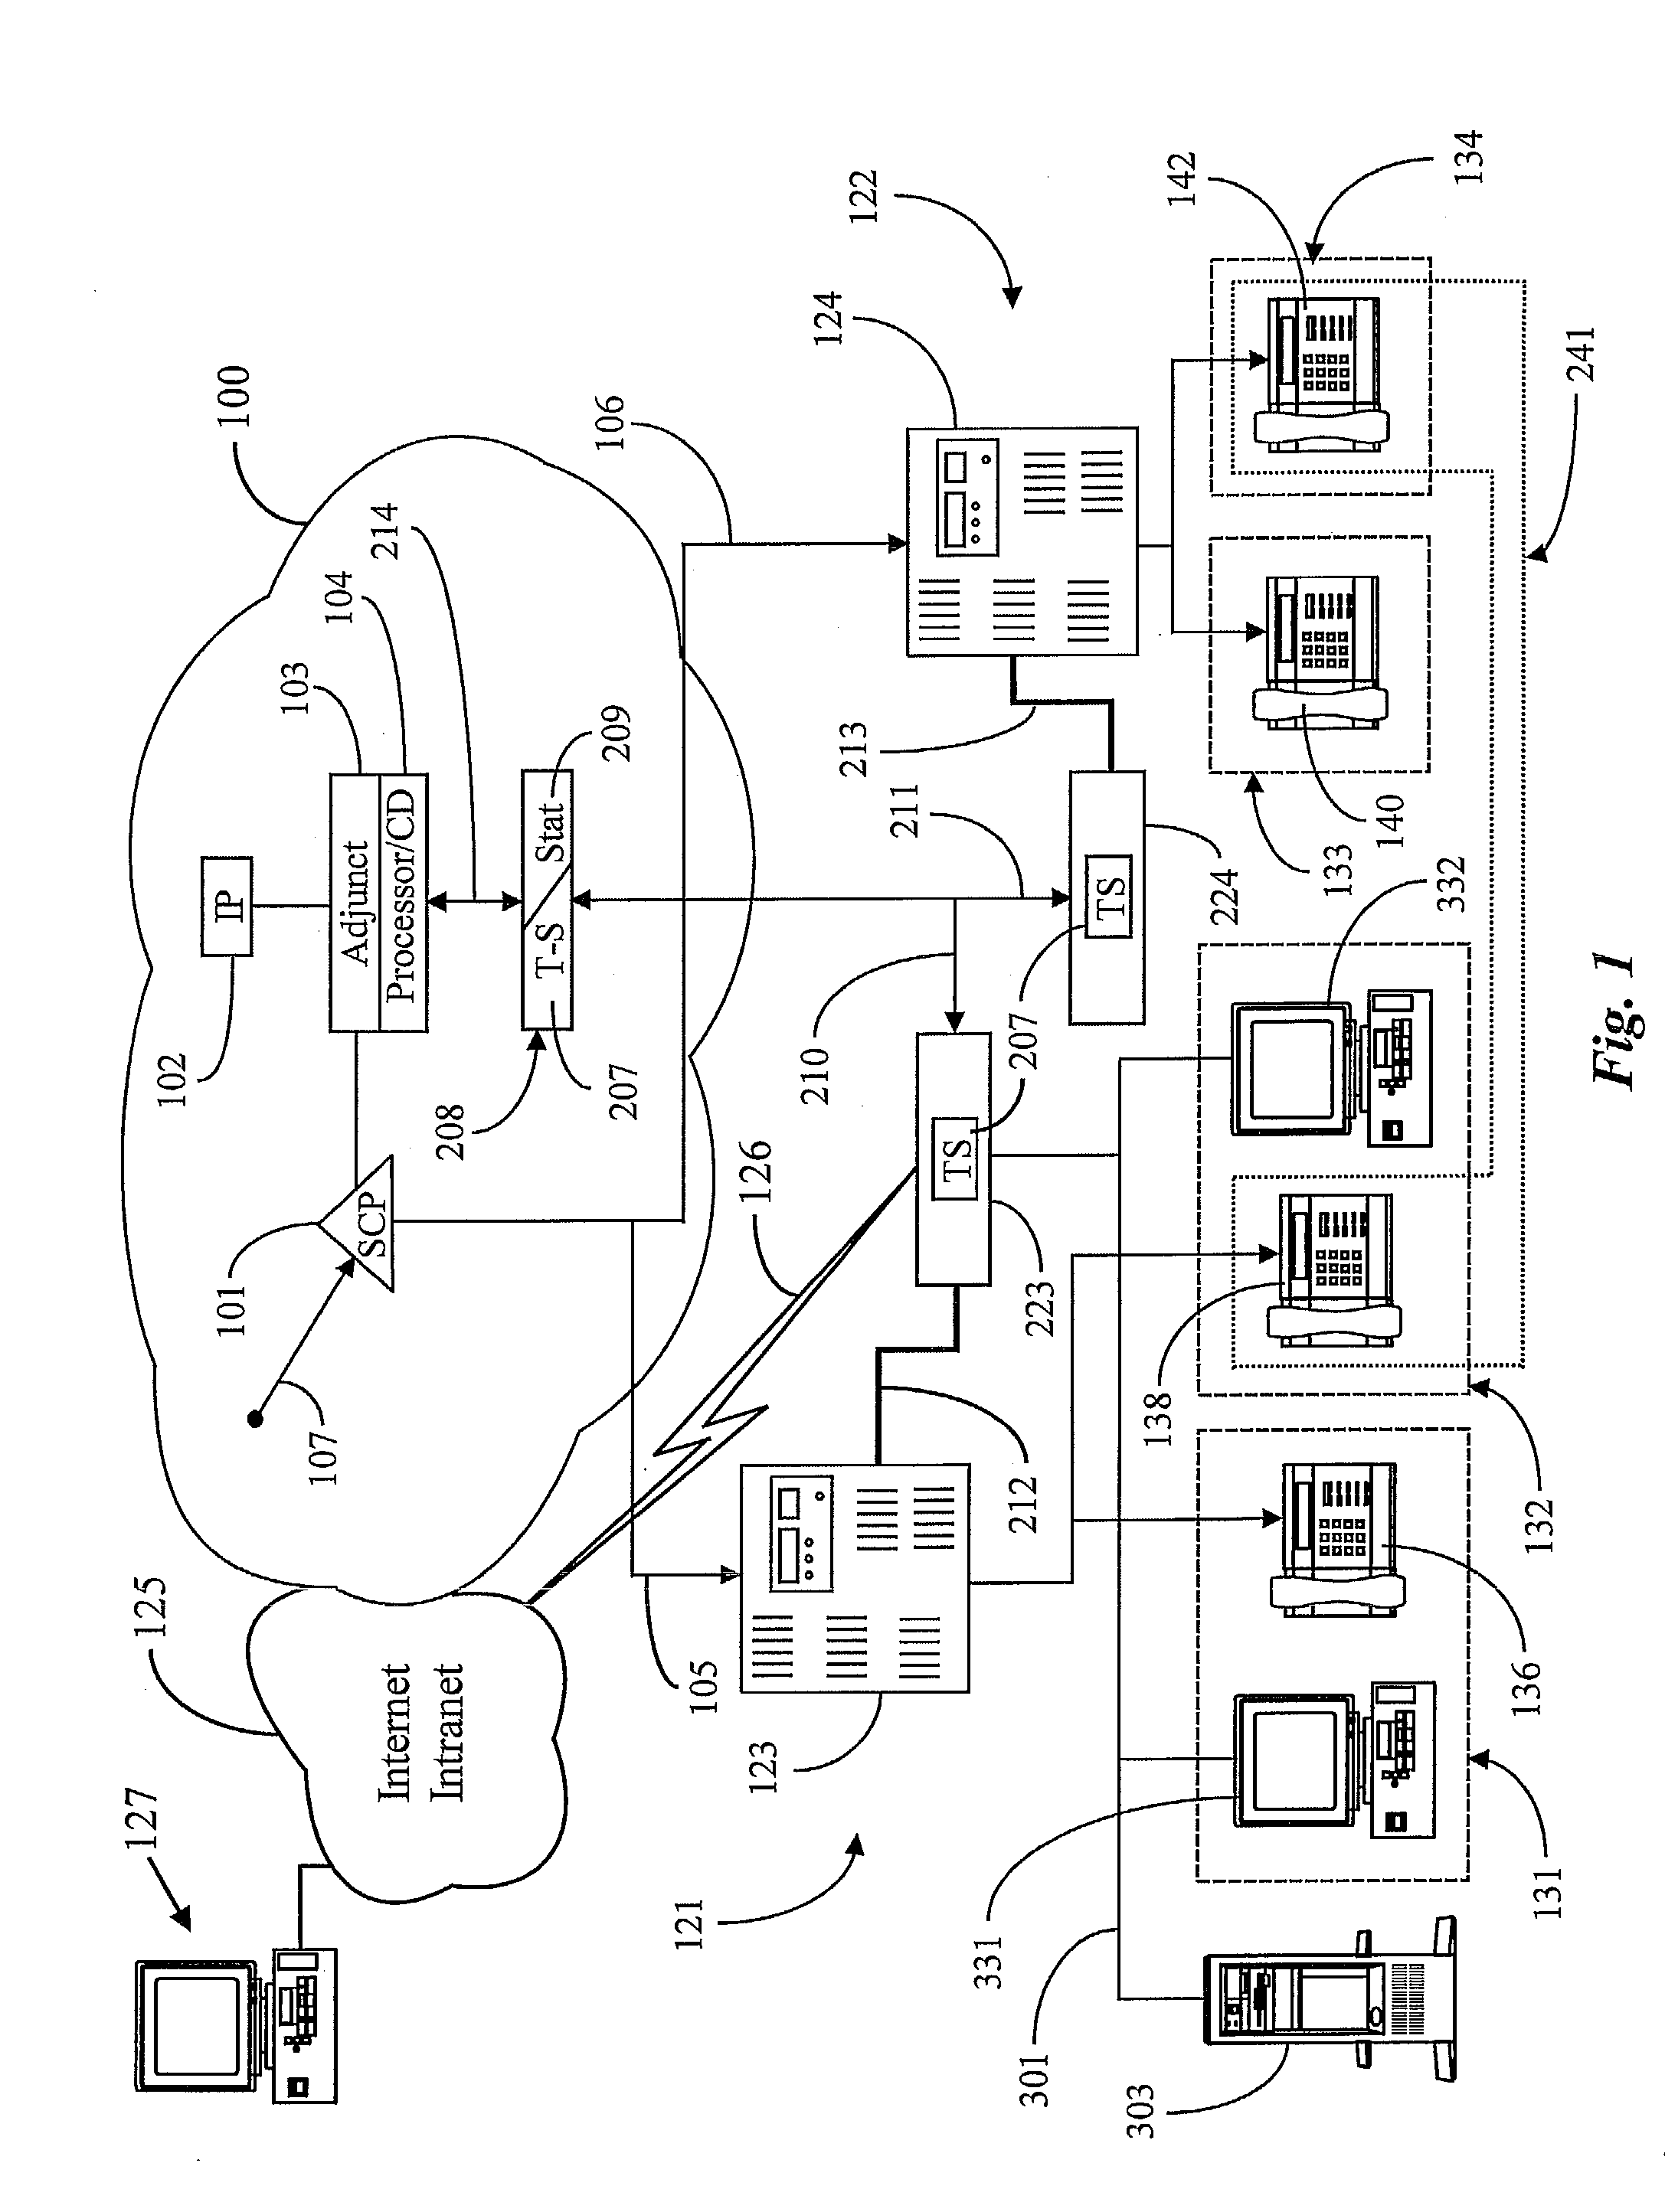 Apparatus and Methods for Coordinating Telephone and Data Communications